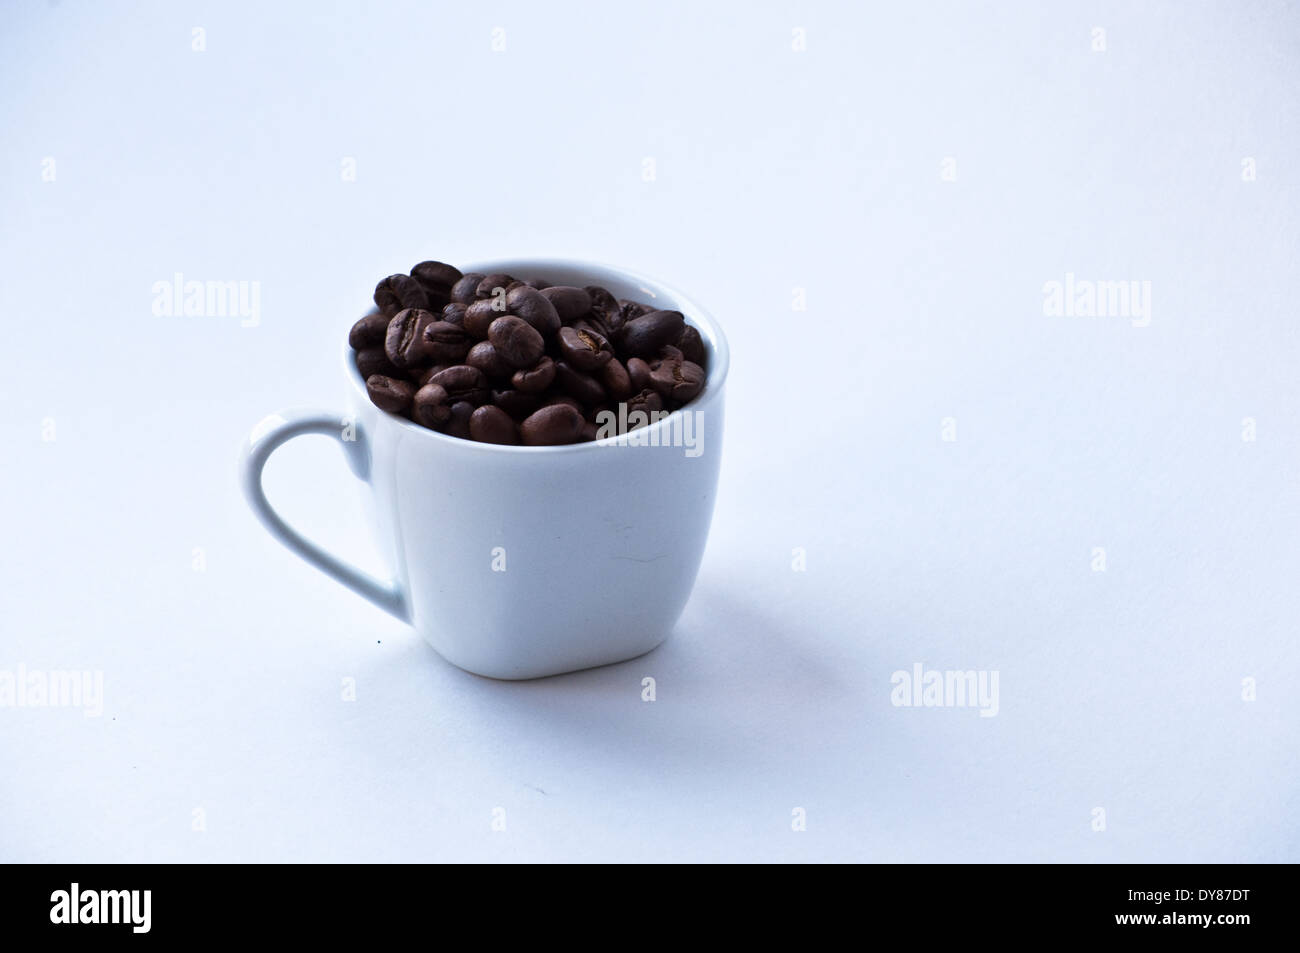 White coffee Cup, in which piled roasted coffee beans. Stock Photo